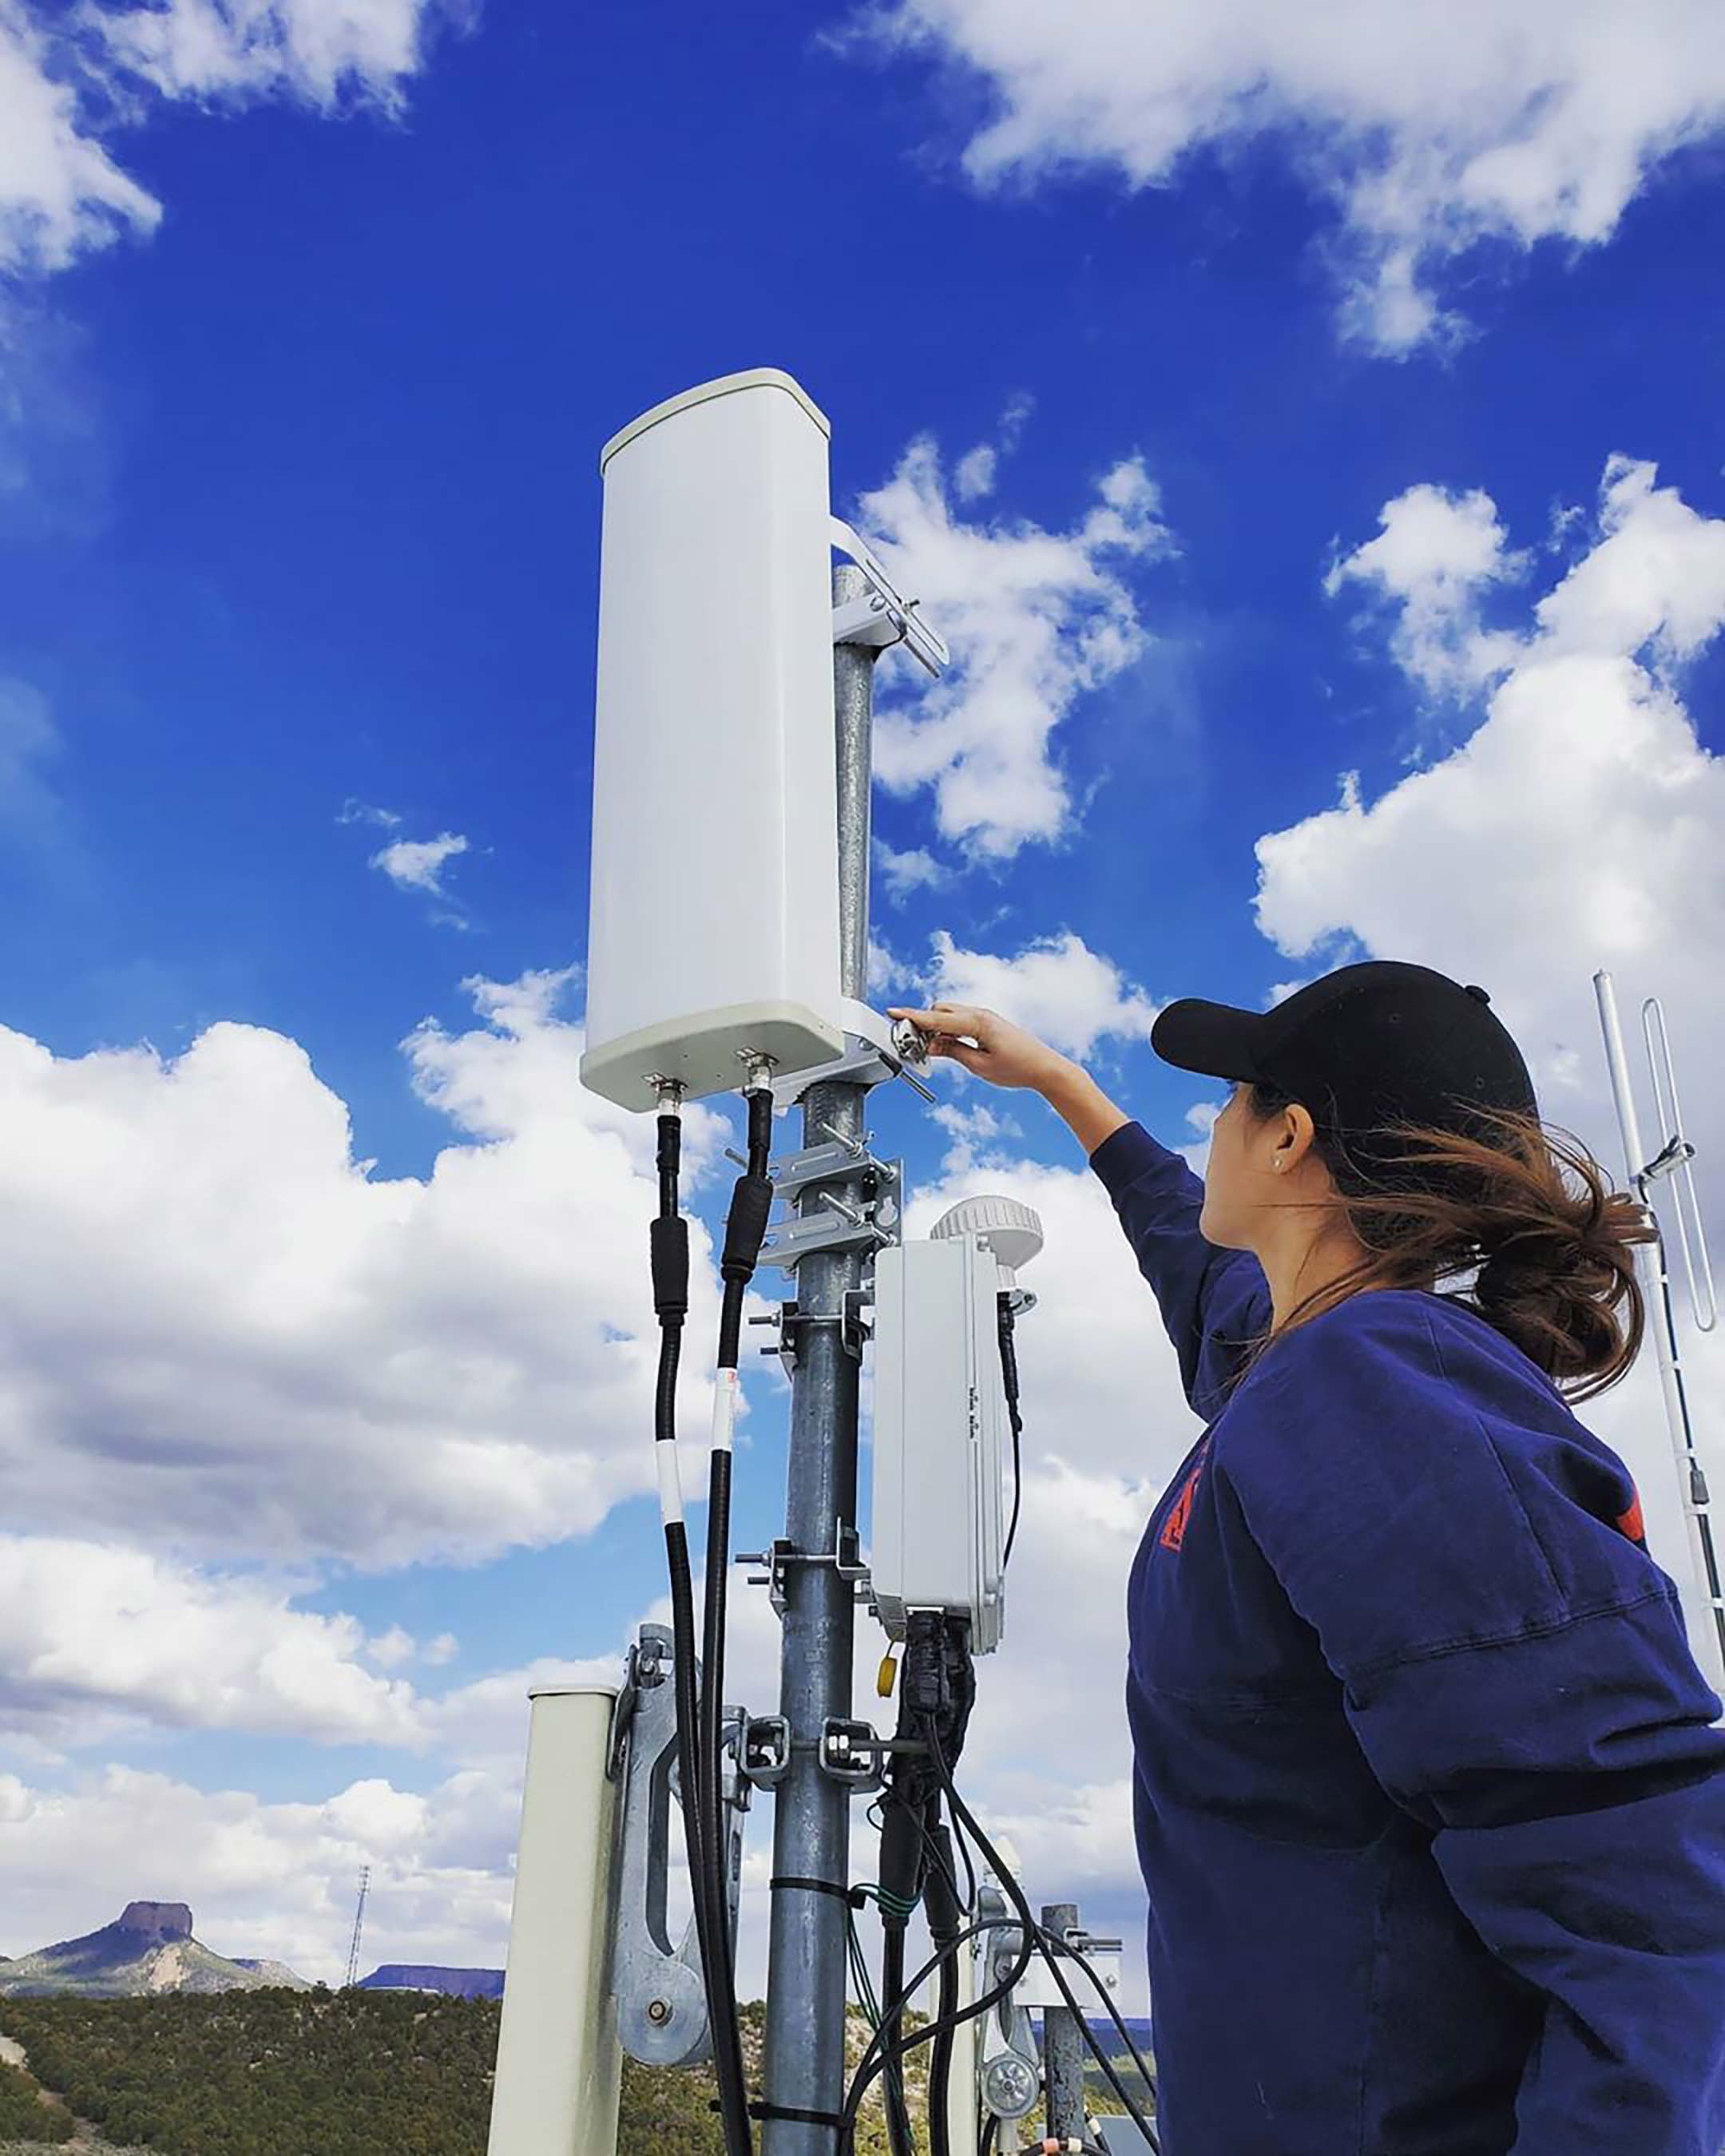 a woman in a blue jacket and cap works on a piece of technology equipment mounted on a pole